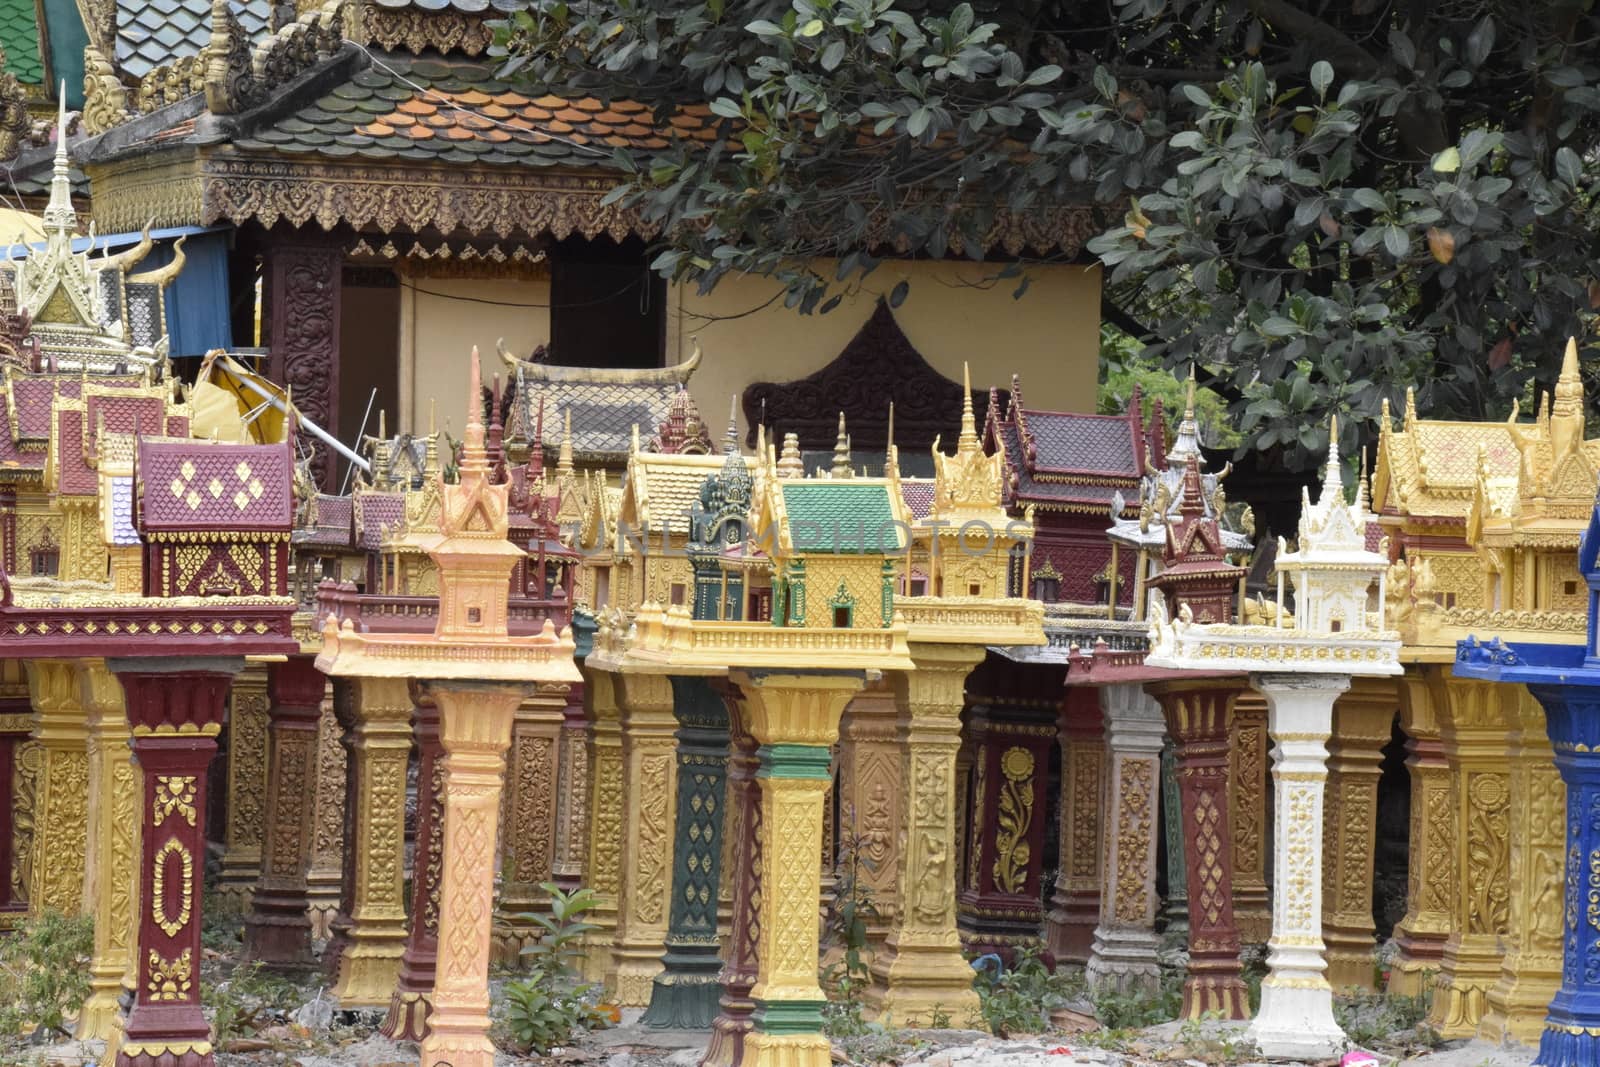 a cluster of spirit houses sit adjacent to a roadside temple ded by mrs_vision